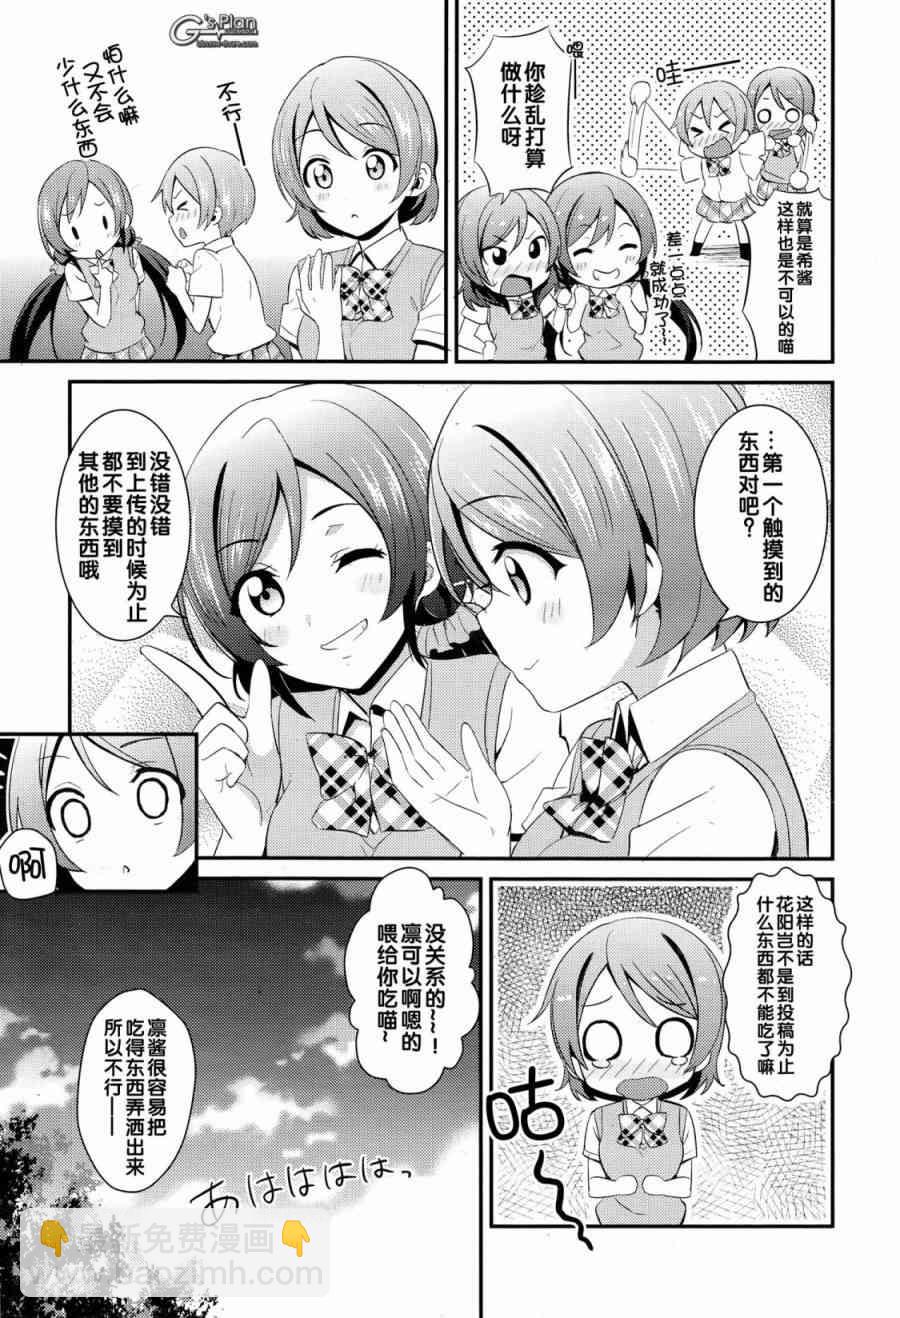 LoveLive - 23話 - 5